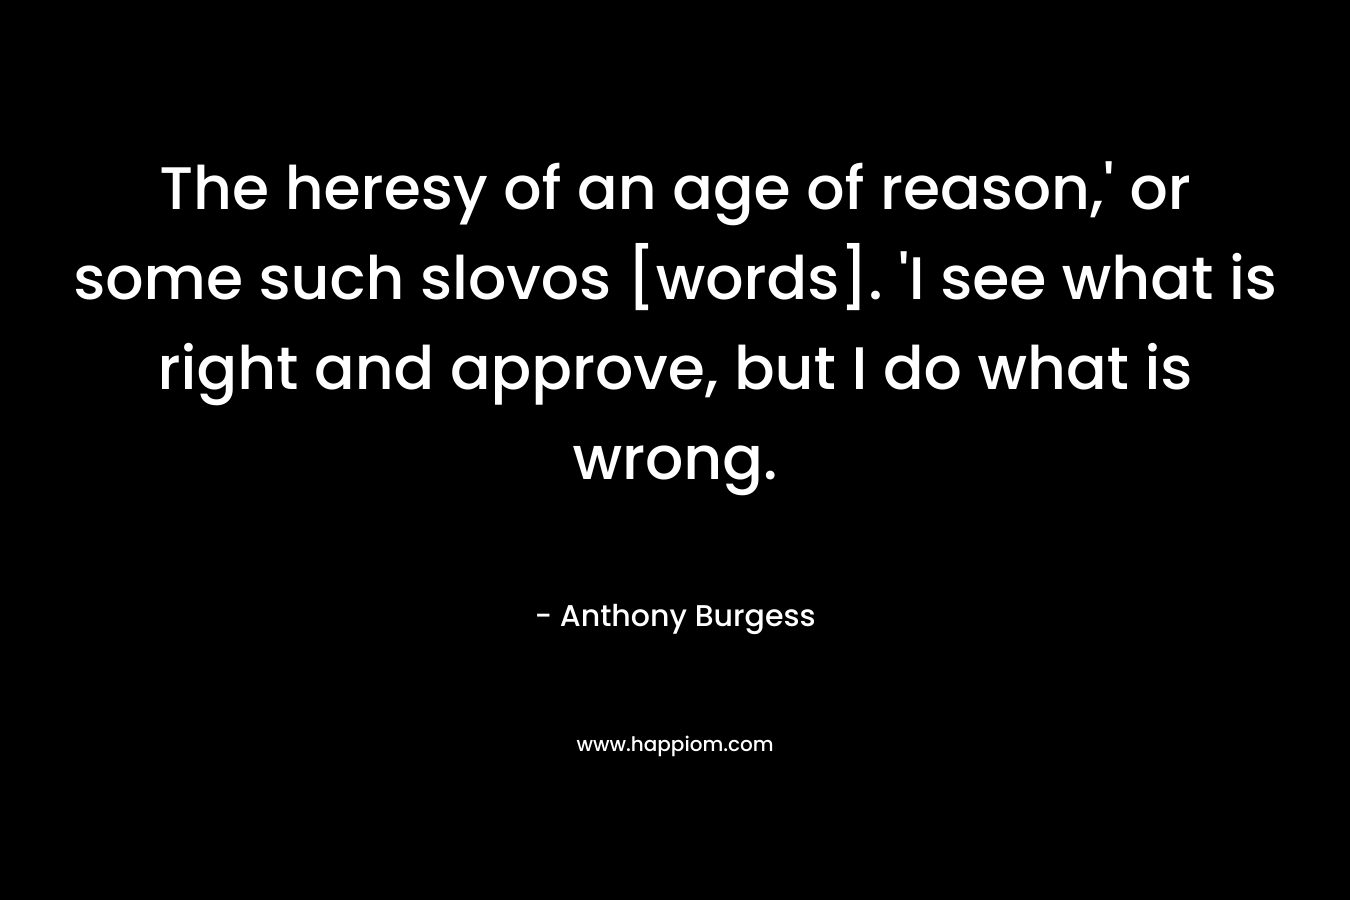 The heresy of an age of reason,’ or some such slovos [words]. ‘I see what is right and approve, but I do what is wrong. – Anthony Burgess